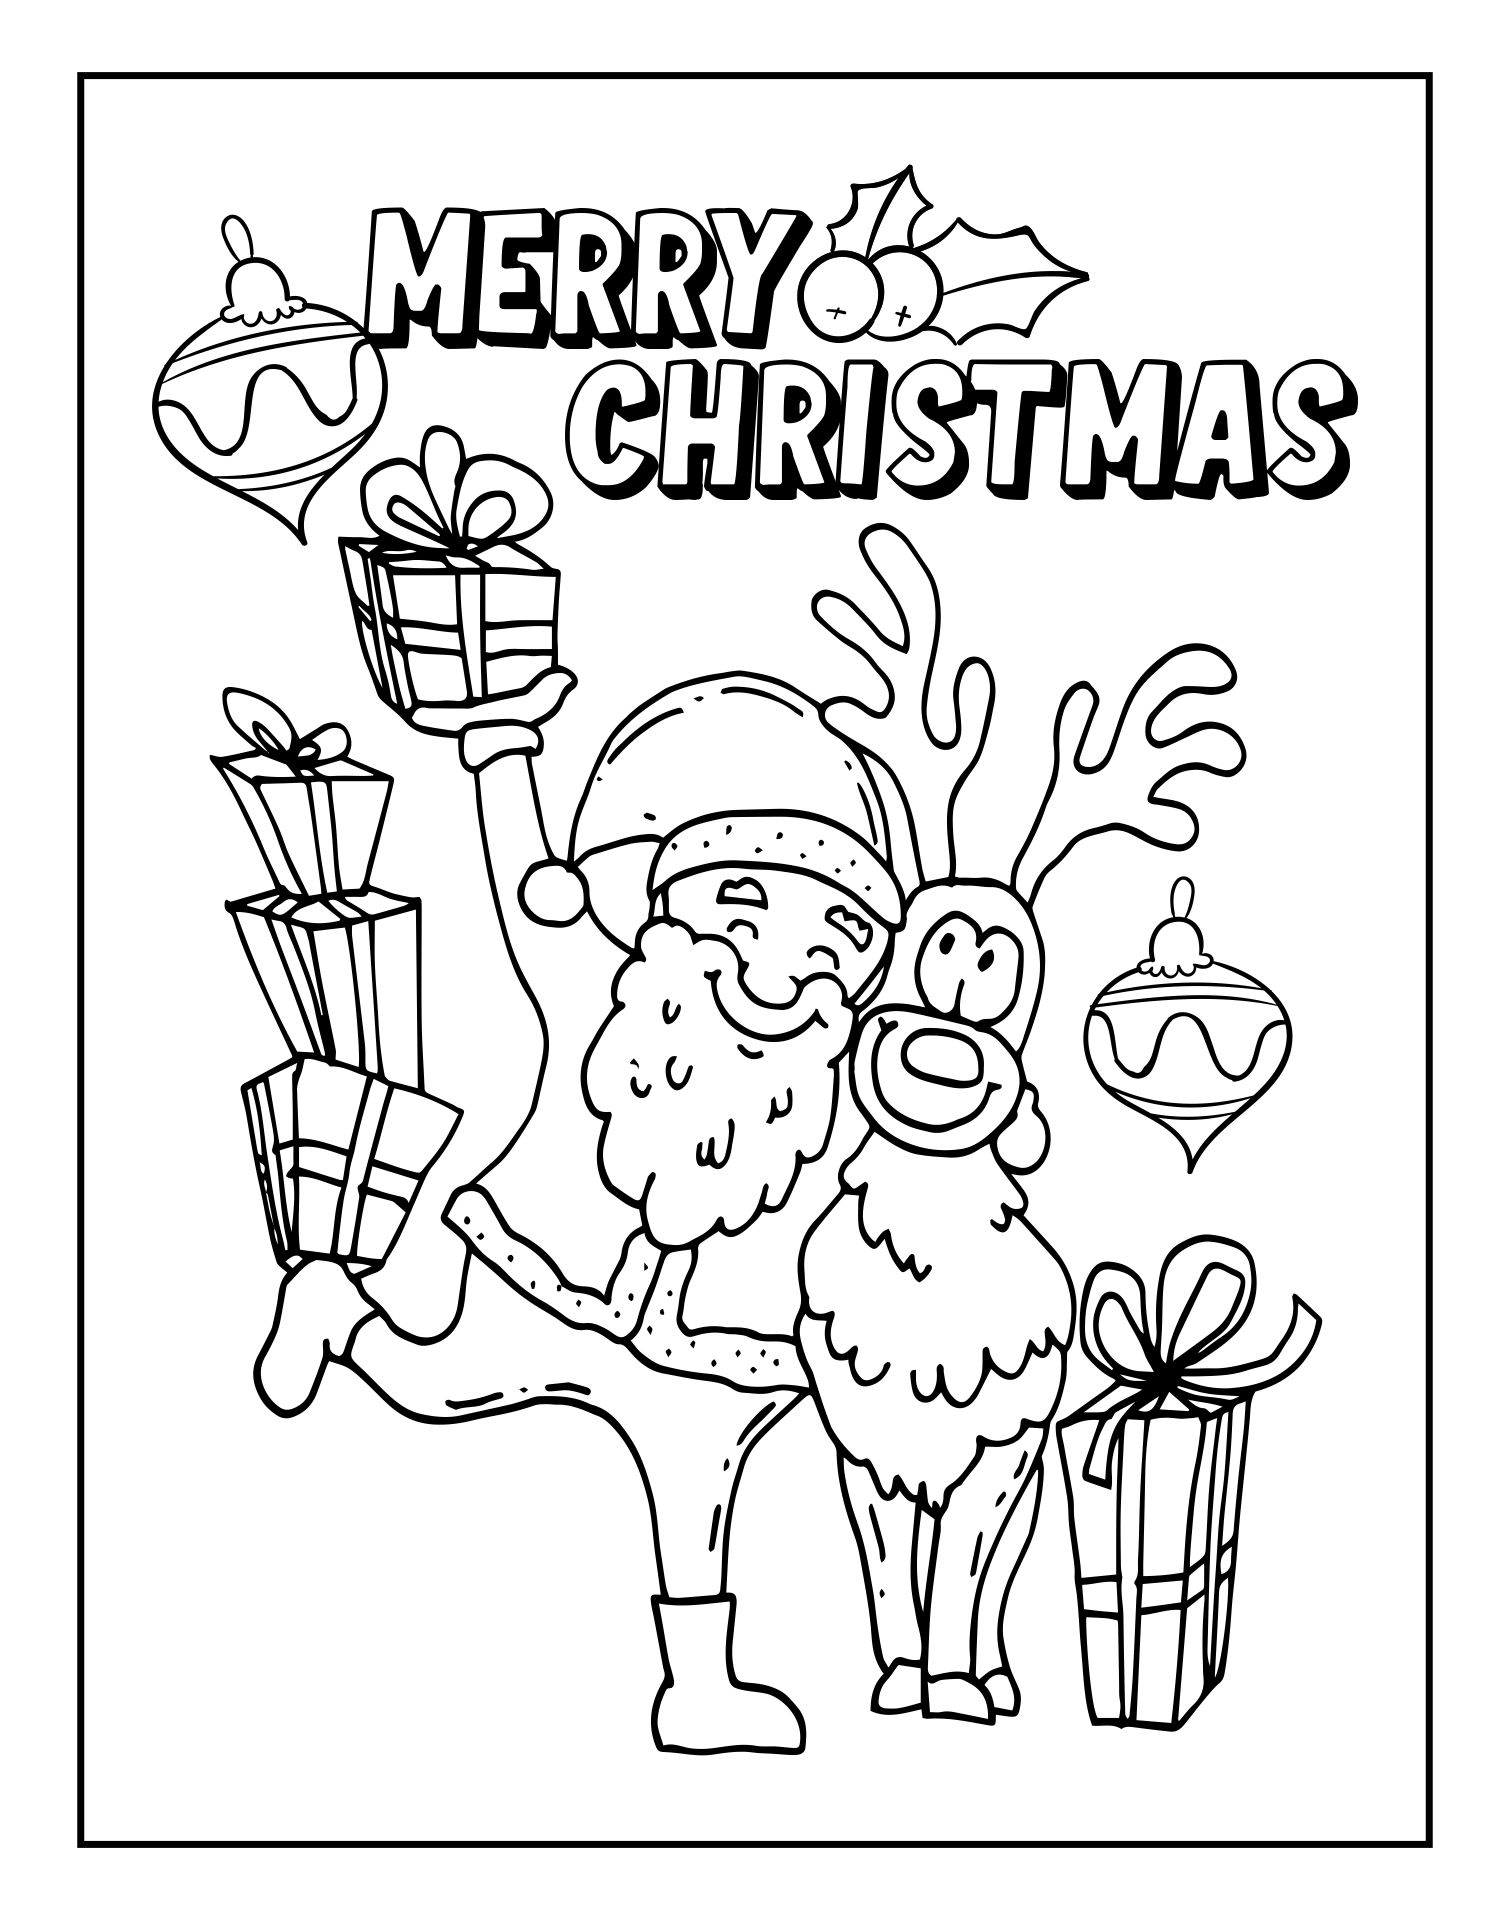 Merry Christmas Cards Coloring Pages